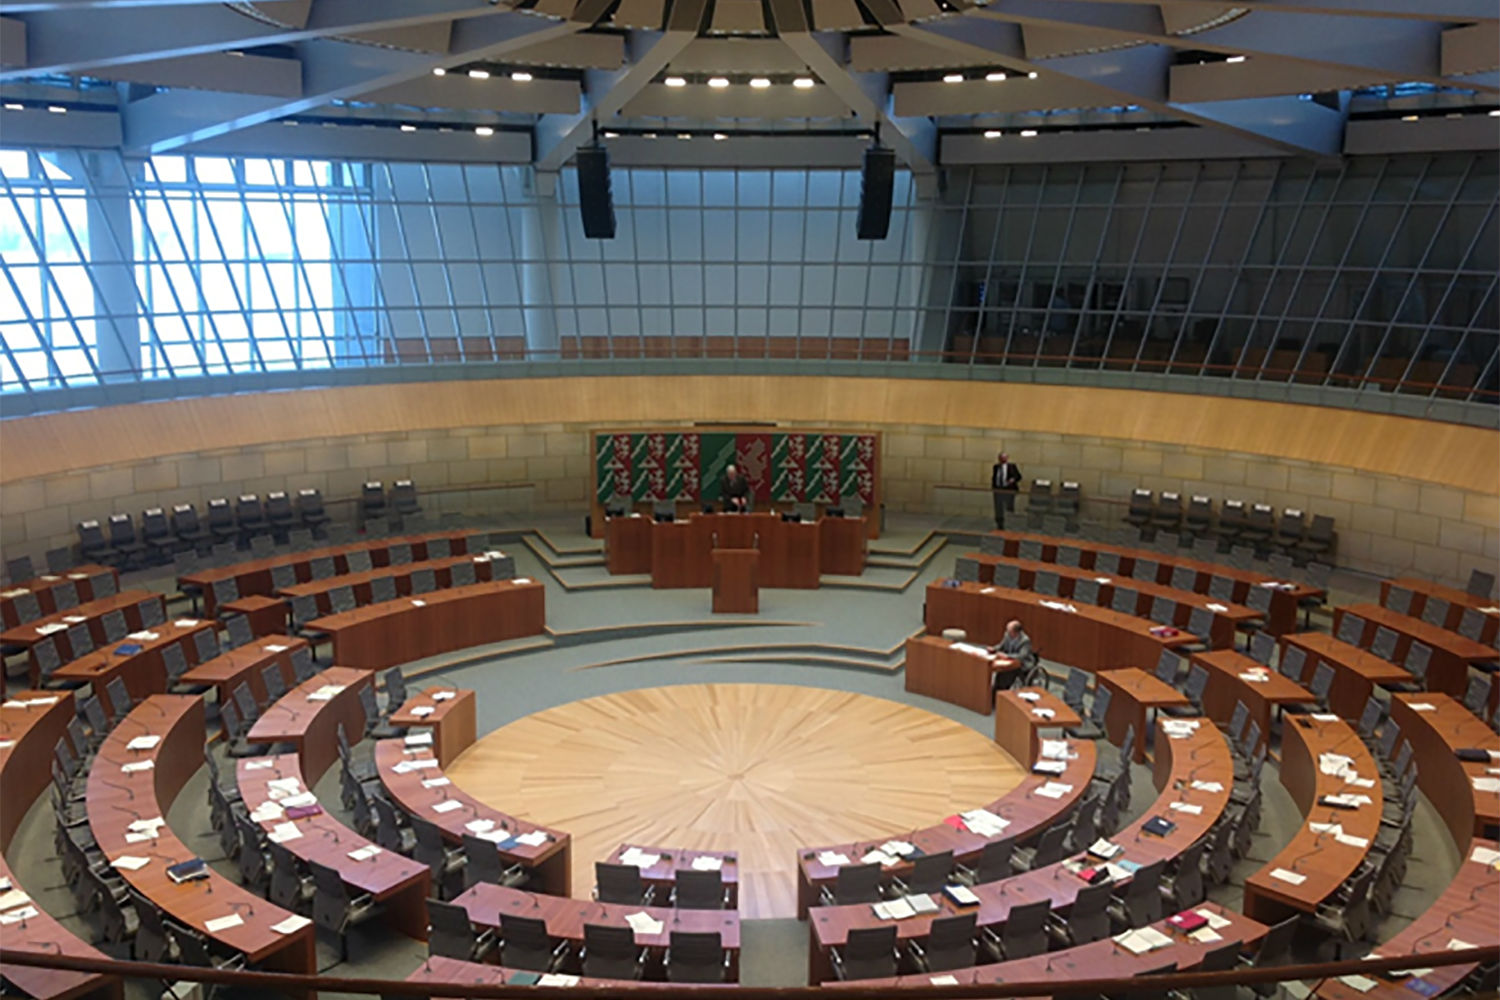 Parliament Hall Landtag in Dusseldorf, Germany. ACA-AMC, a WSDG company, in charge of the room acoustics and electro-acoustical systems. Hall